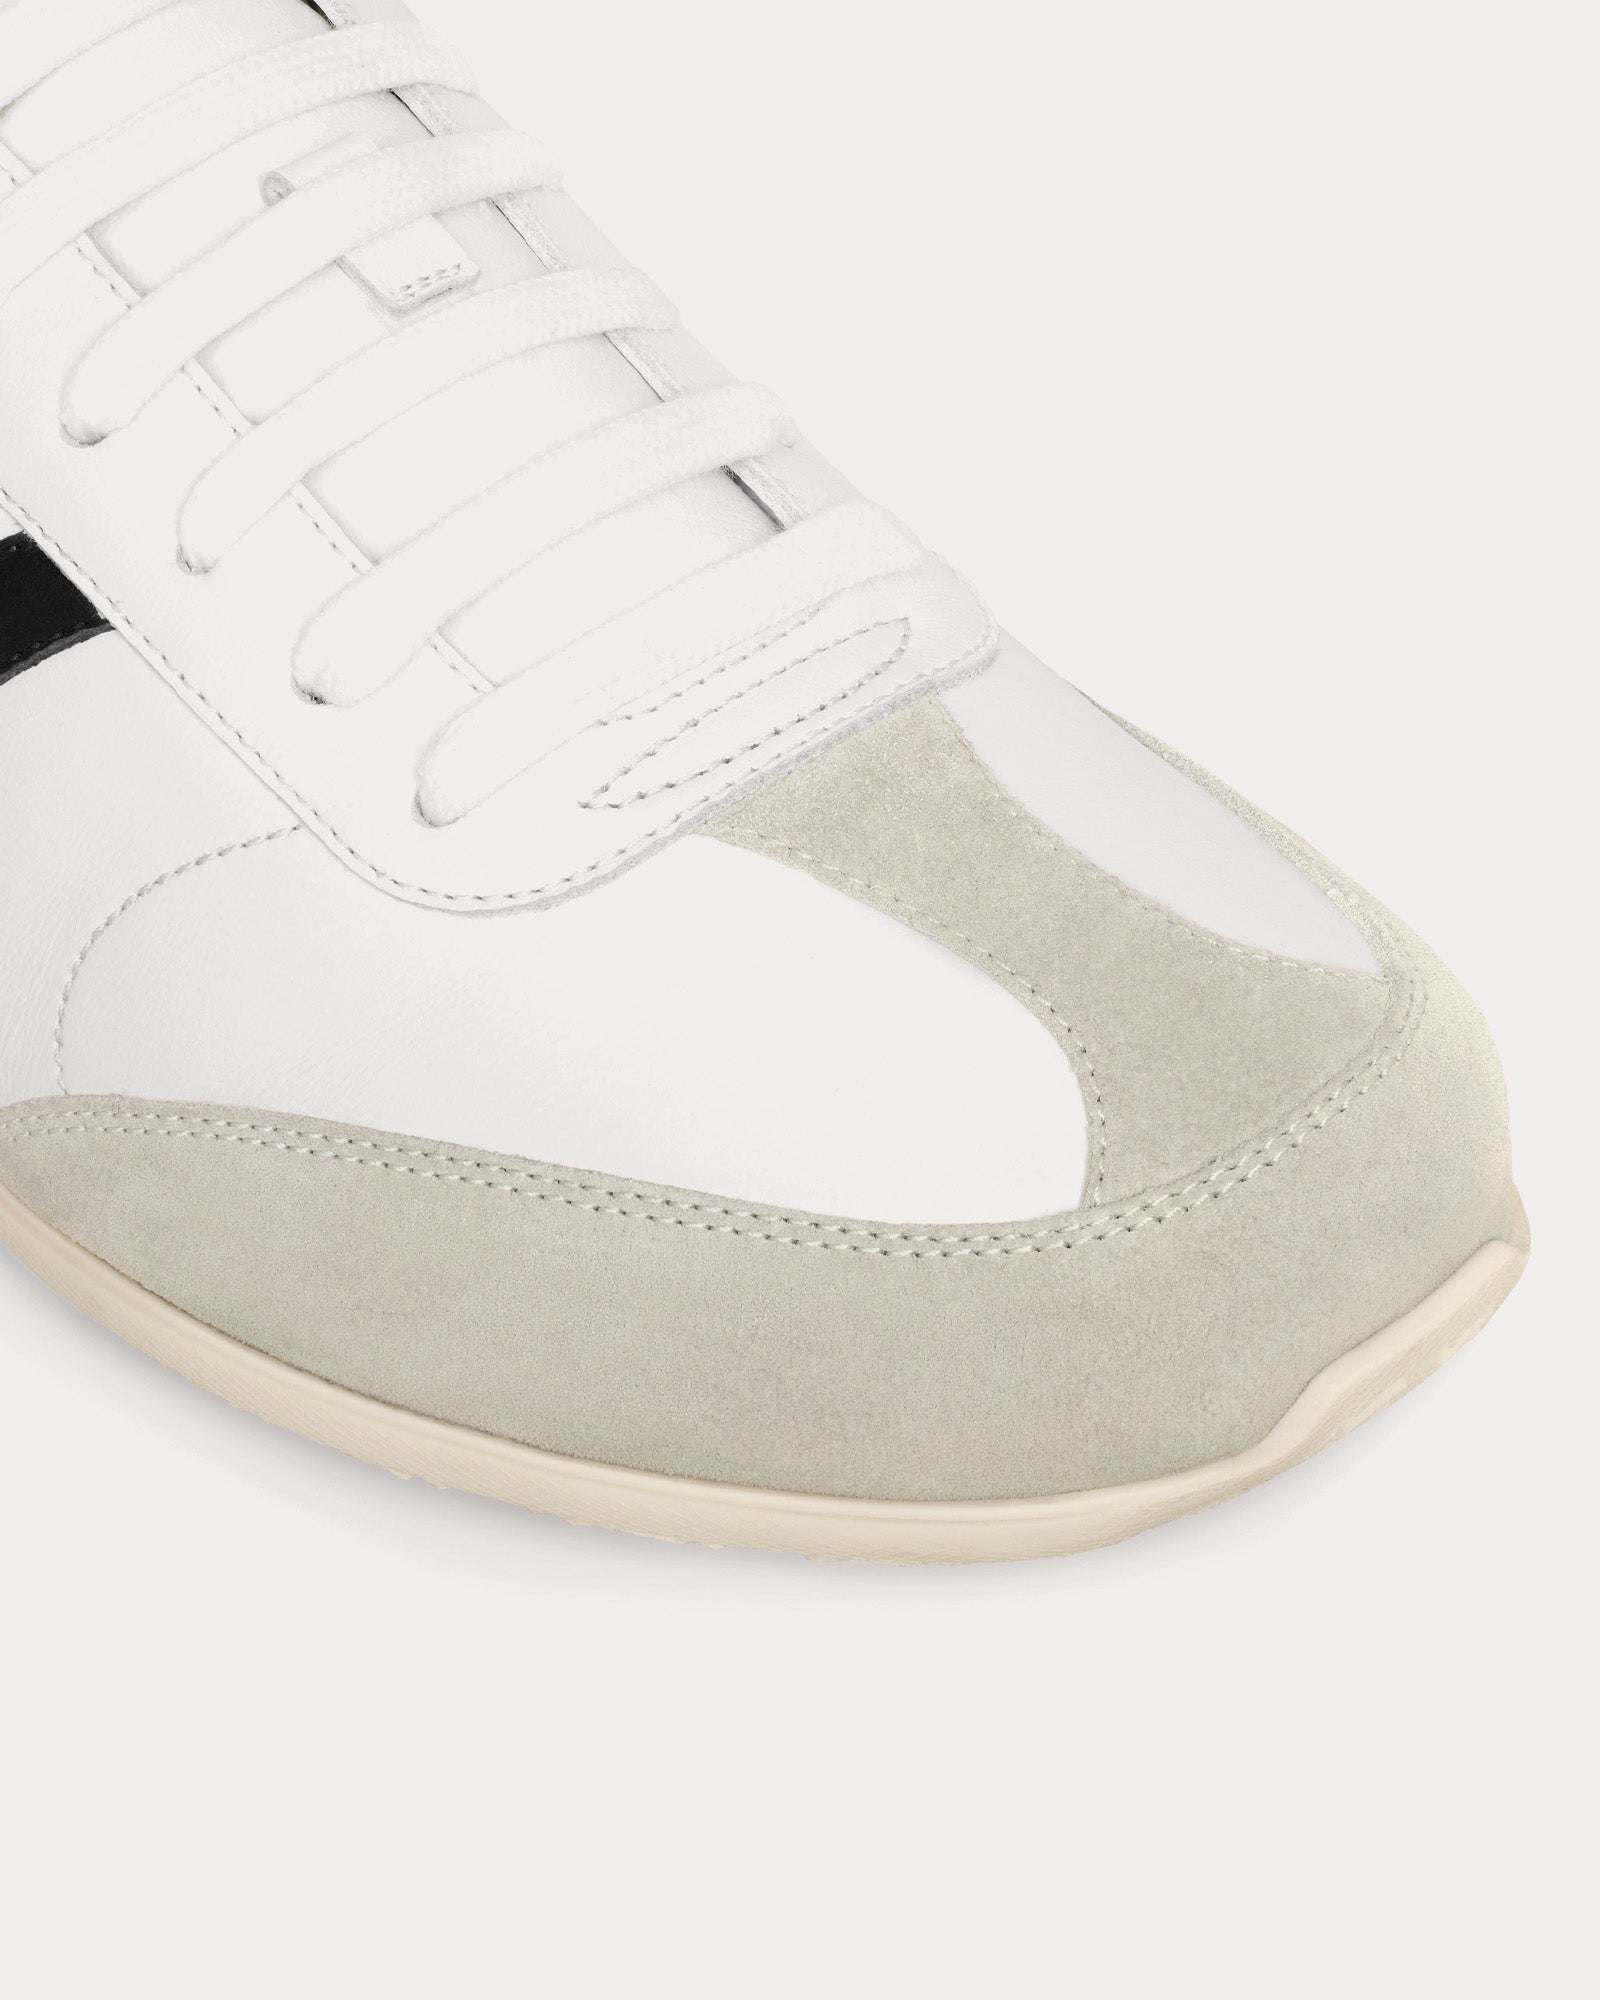 Celine - Jogger with Triomphe Signature Optic White / Grey / Black Low Top Sneakers